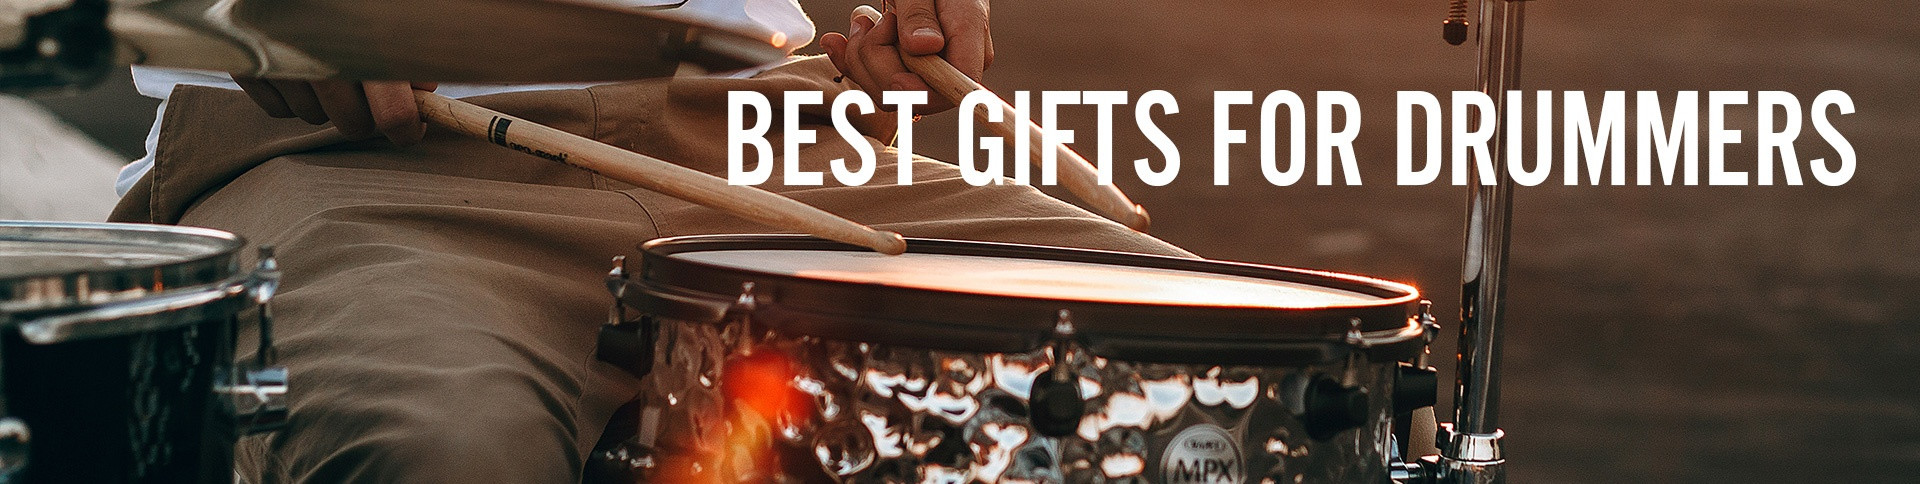 Gift Ideas For Drummer Boyfriend
 Valentine S Gifts For A Drummer Gift Ftempo